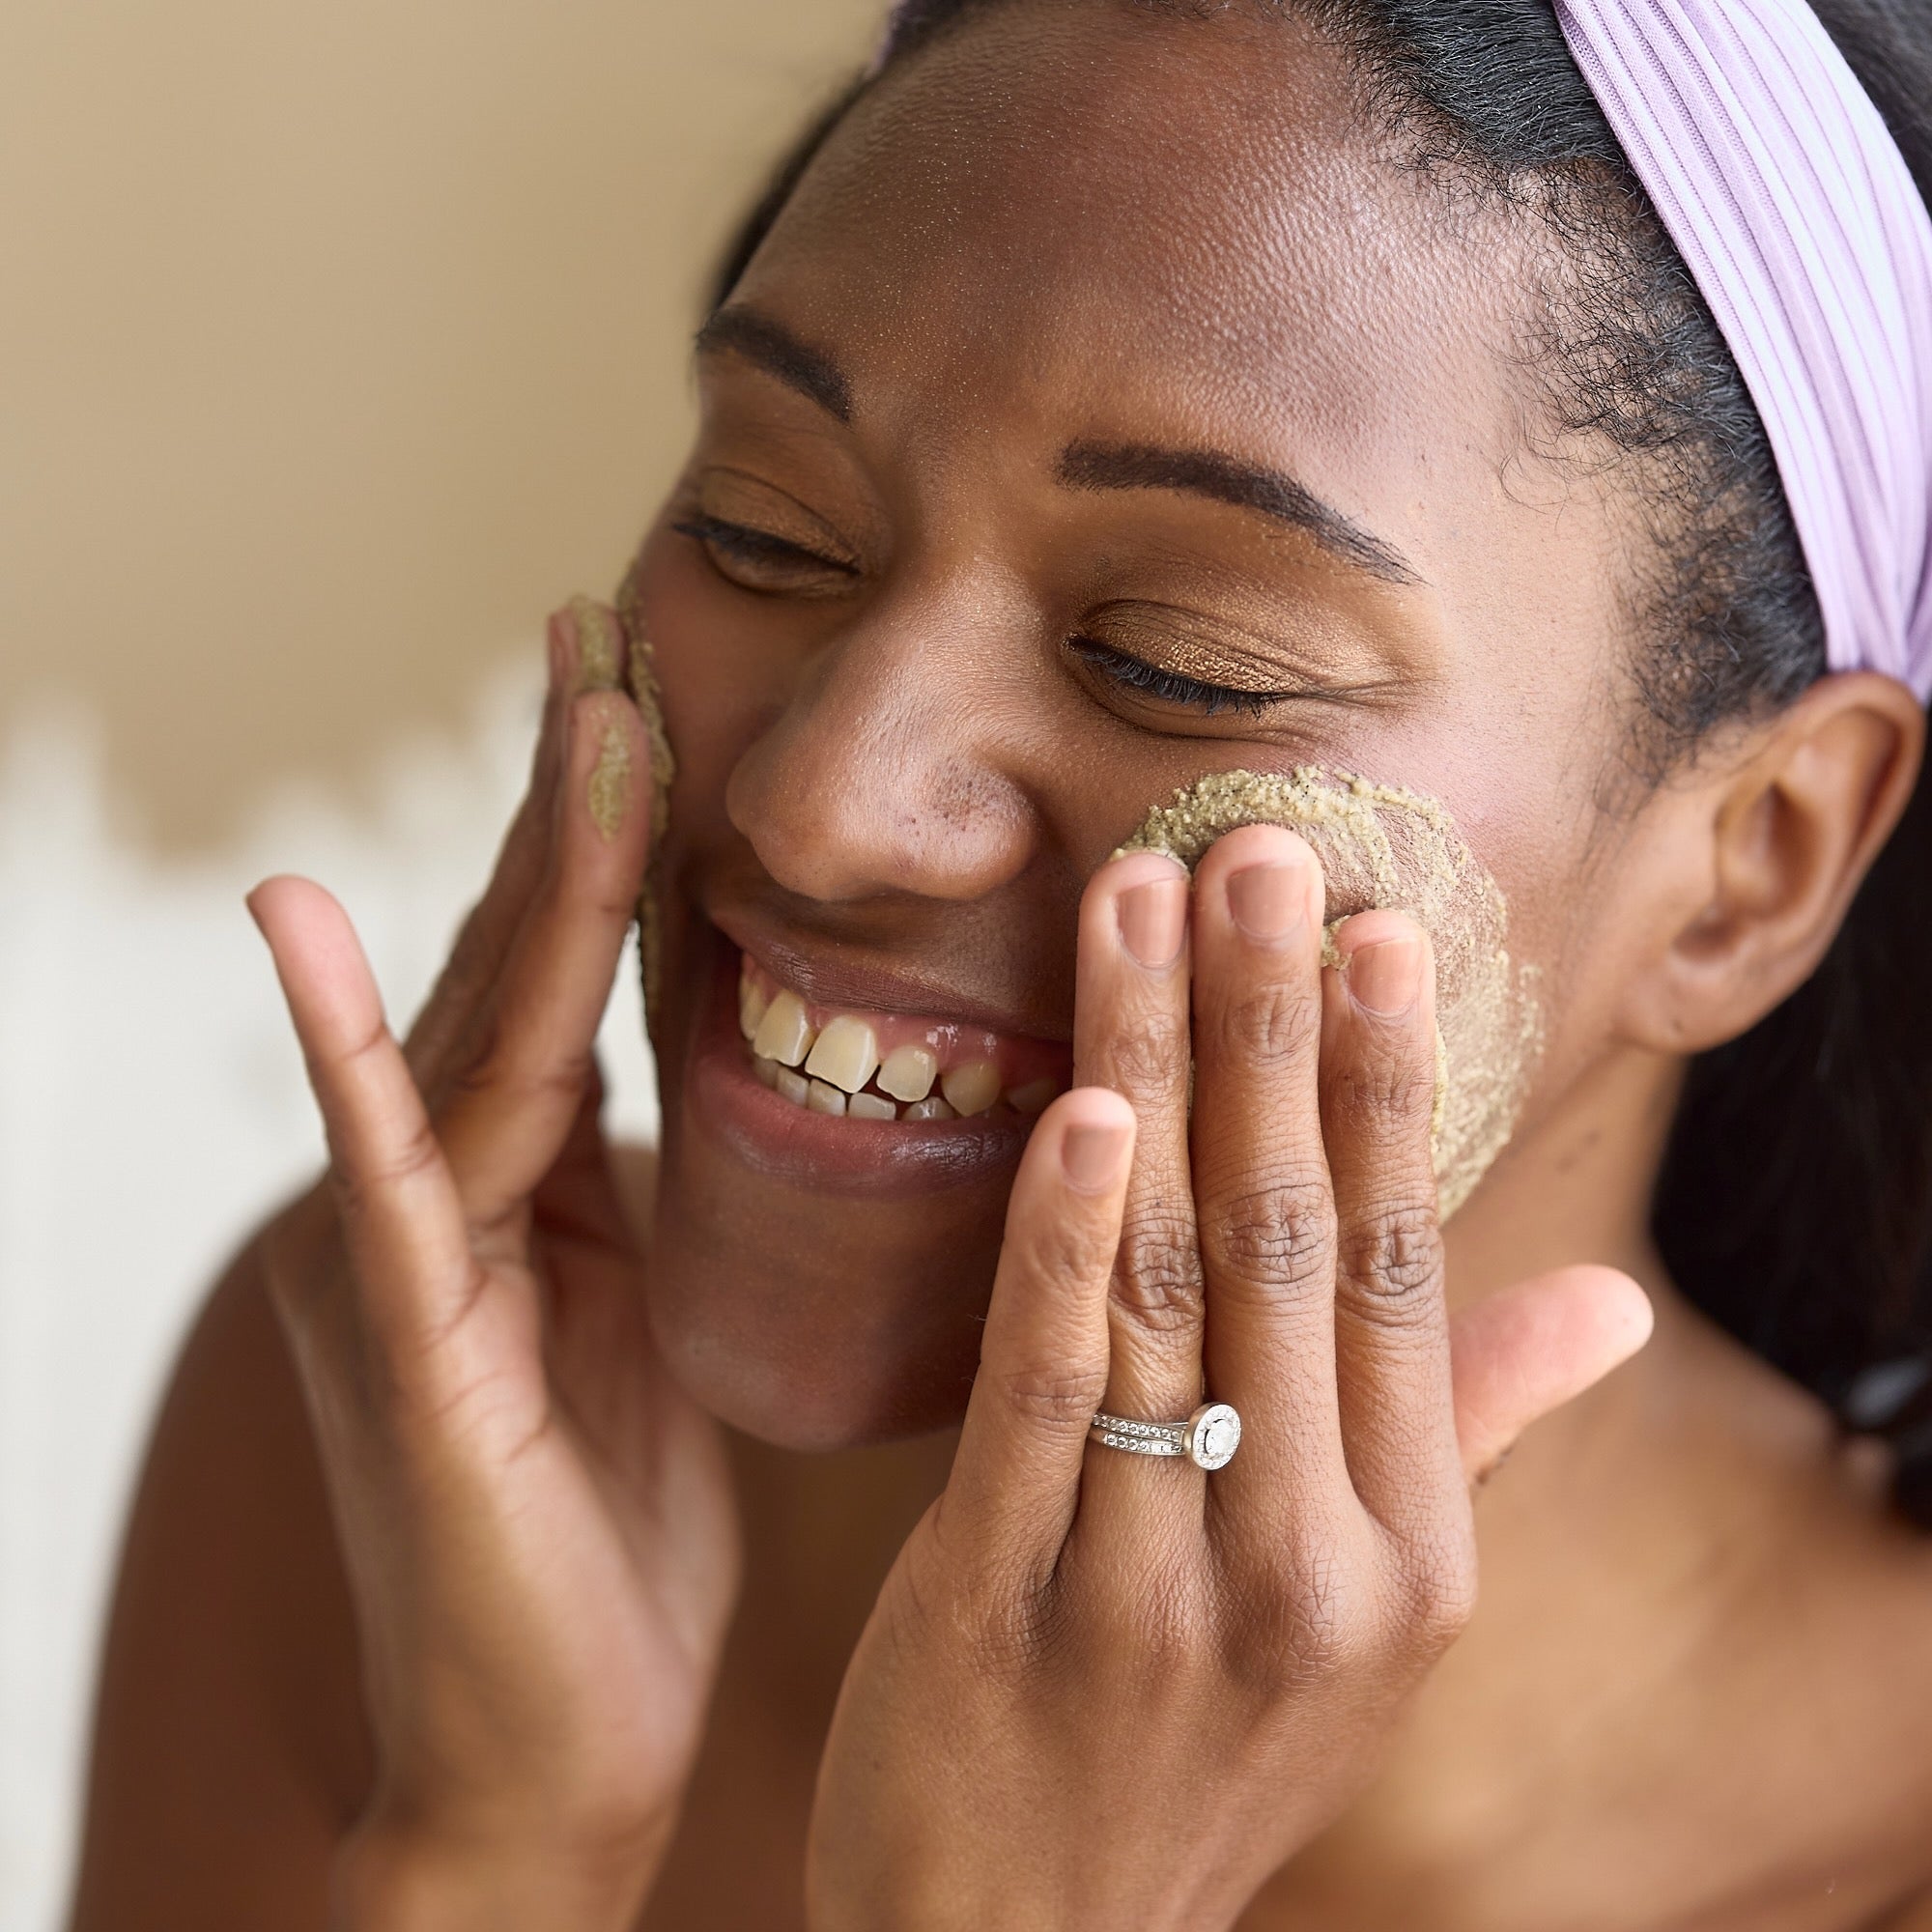 Ready, Set, Glow: Why You Need to be Exfoliating